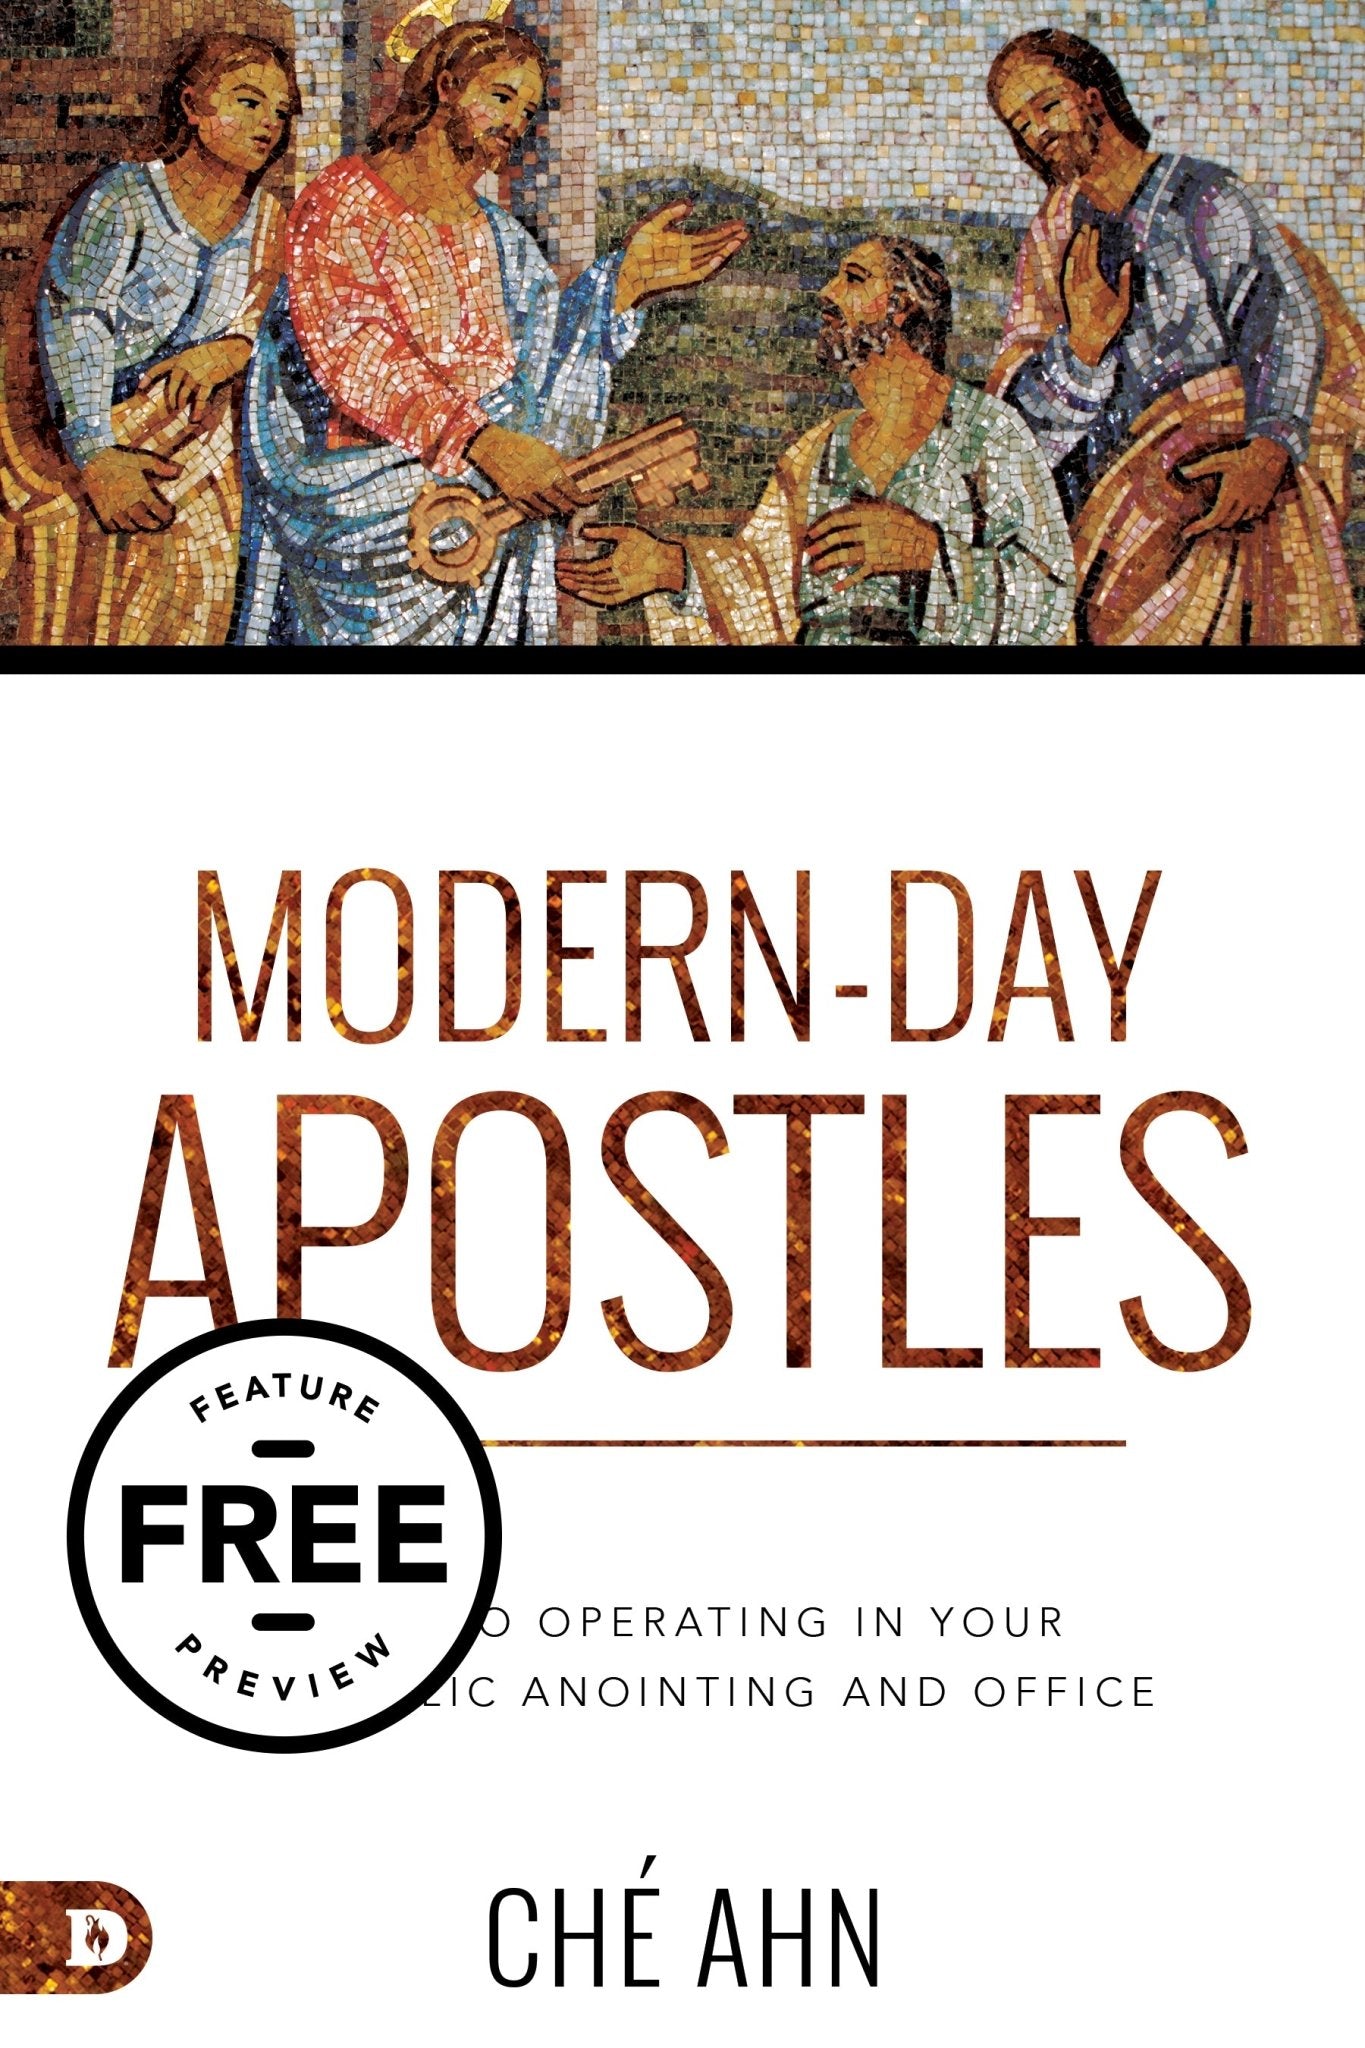 Modern-Day Apostles Free Feature Message (PDF Download)